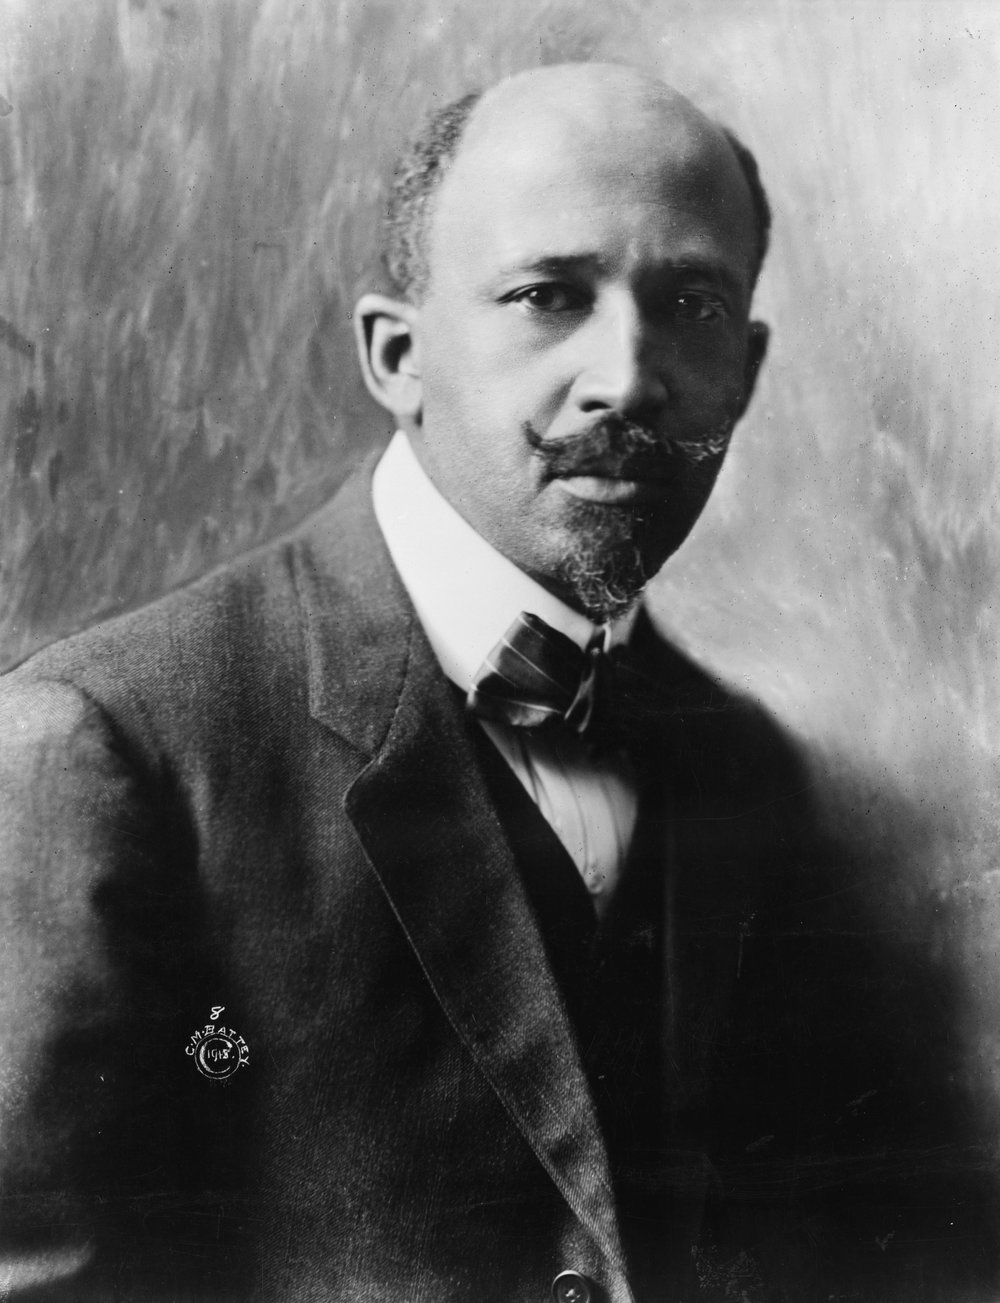  W. E. B. Du Bois (1868 – 1963), co-founder of the National Association for the Advancement of Colored People (NAACP), in 1918.   Source  